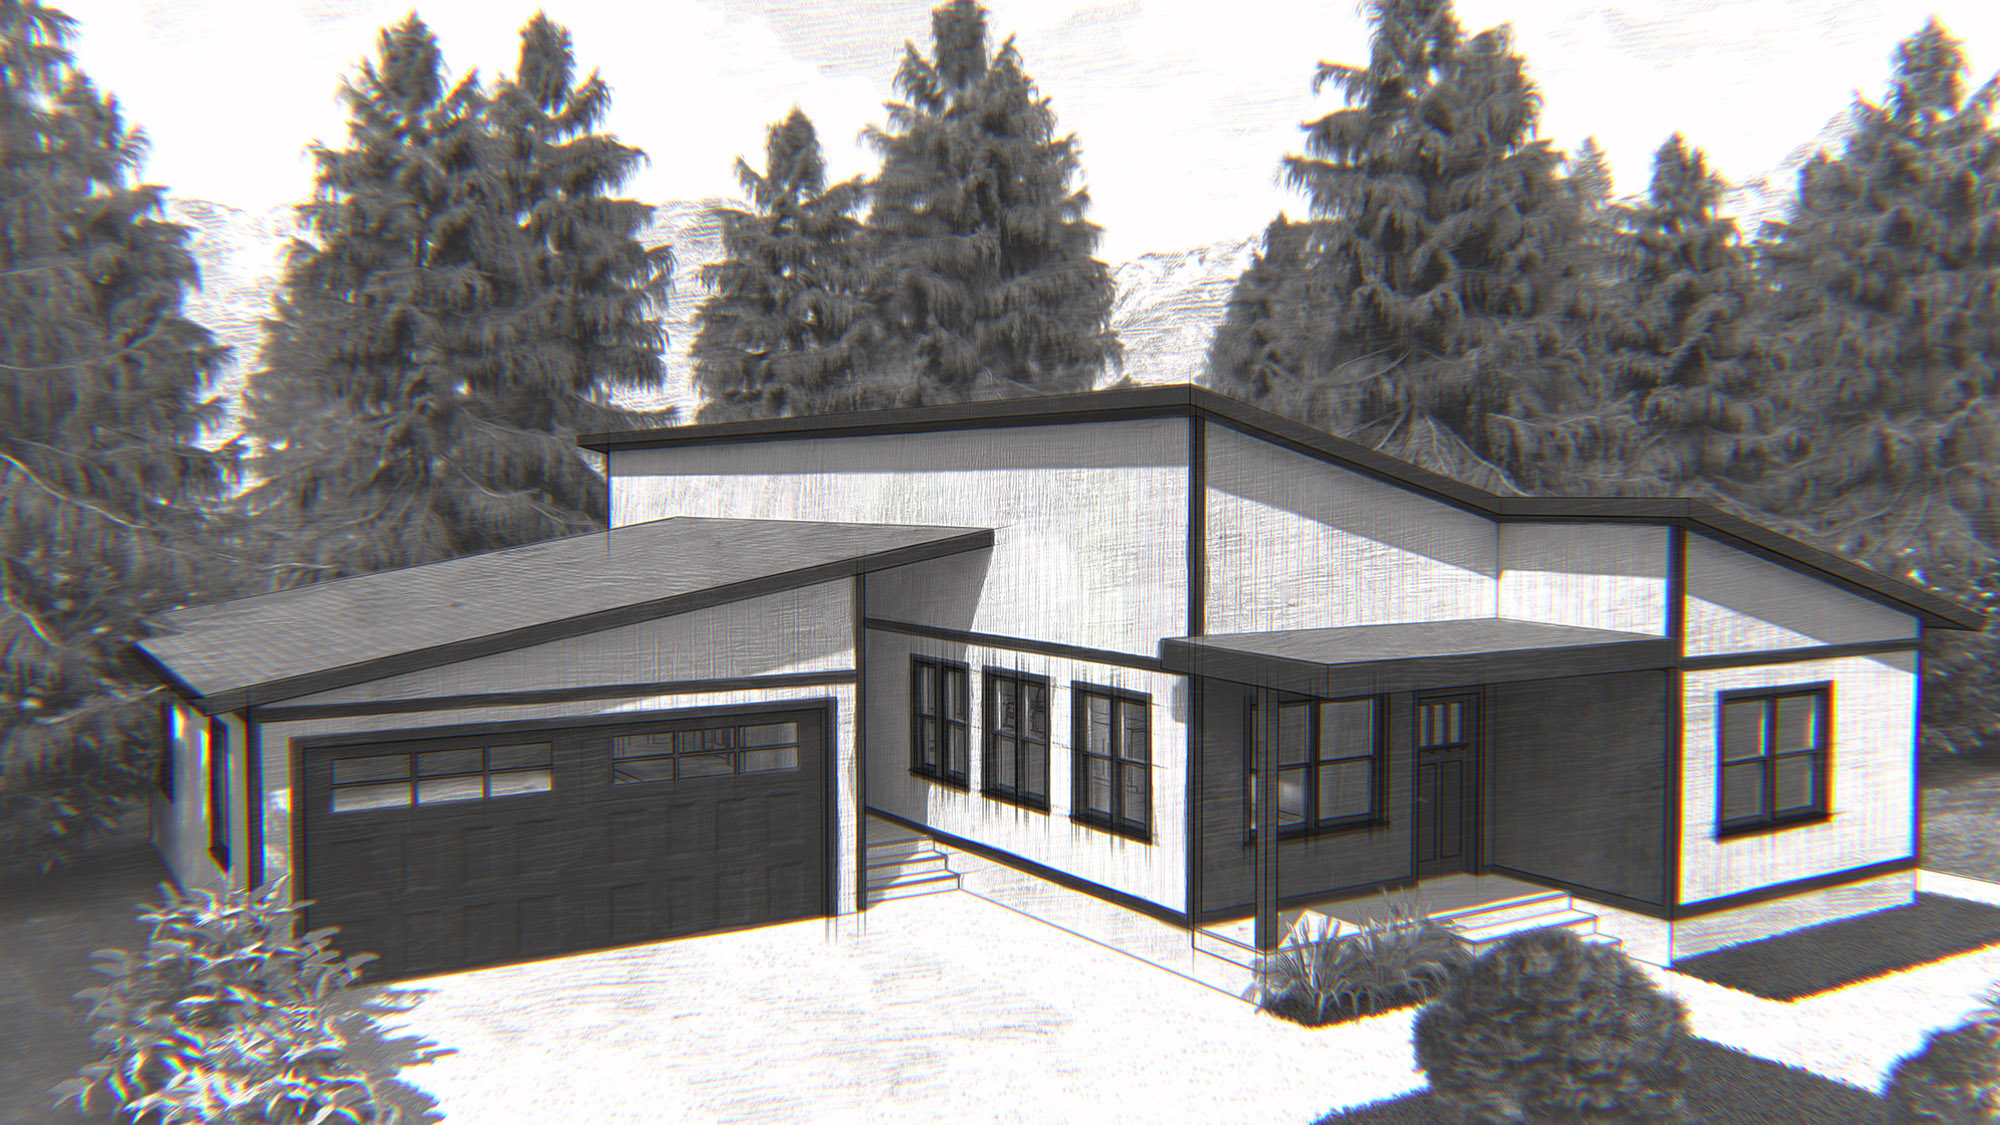 Rendering of modular city series 1300 plan from Buffalo Modular Homes with modern roof line and optional attached garage and front porch